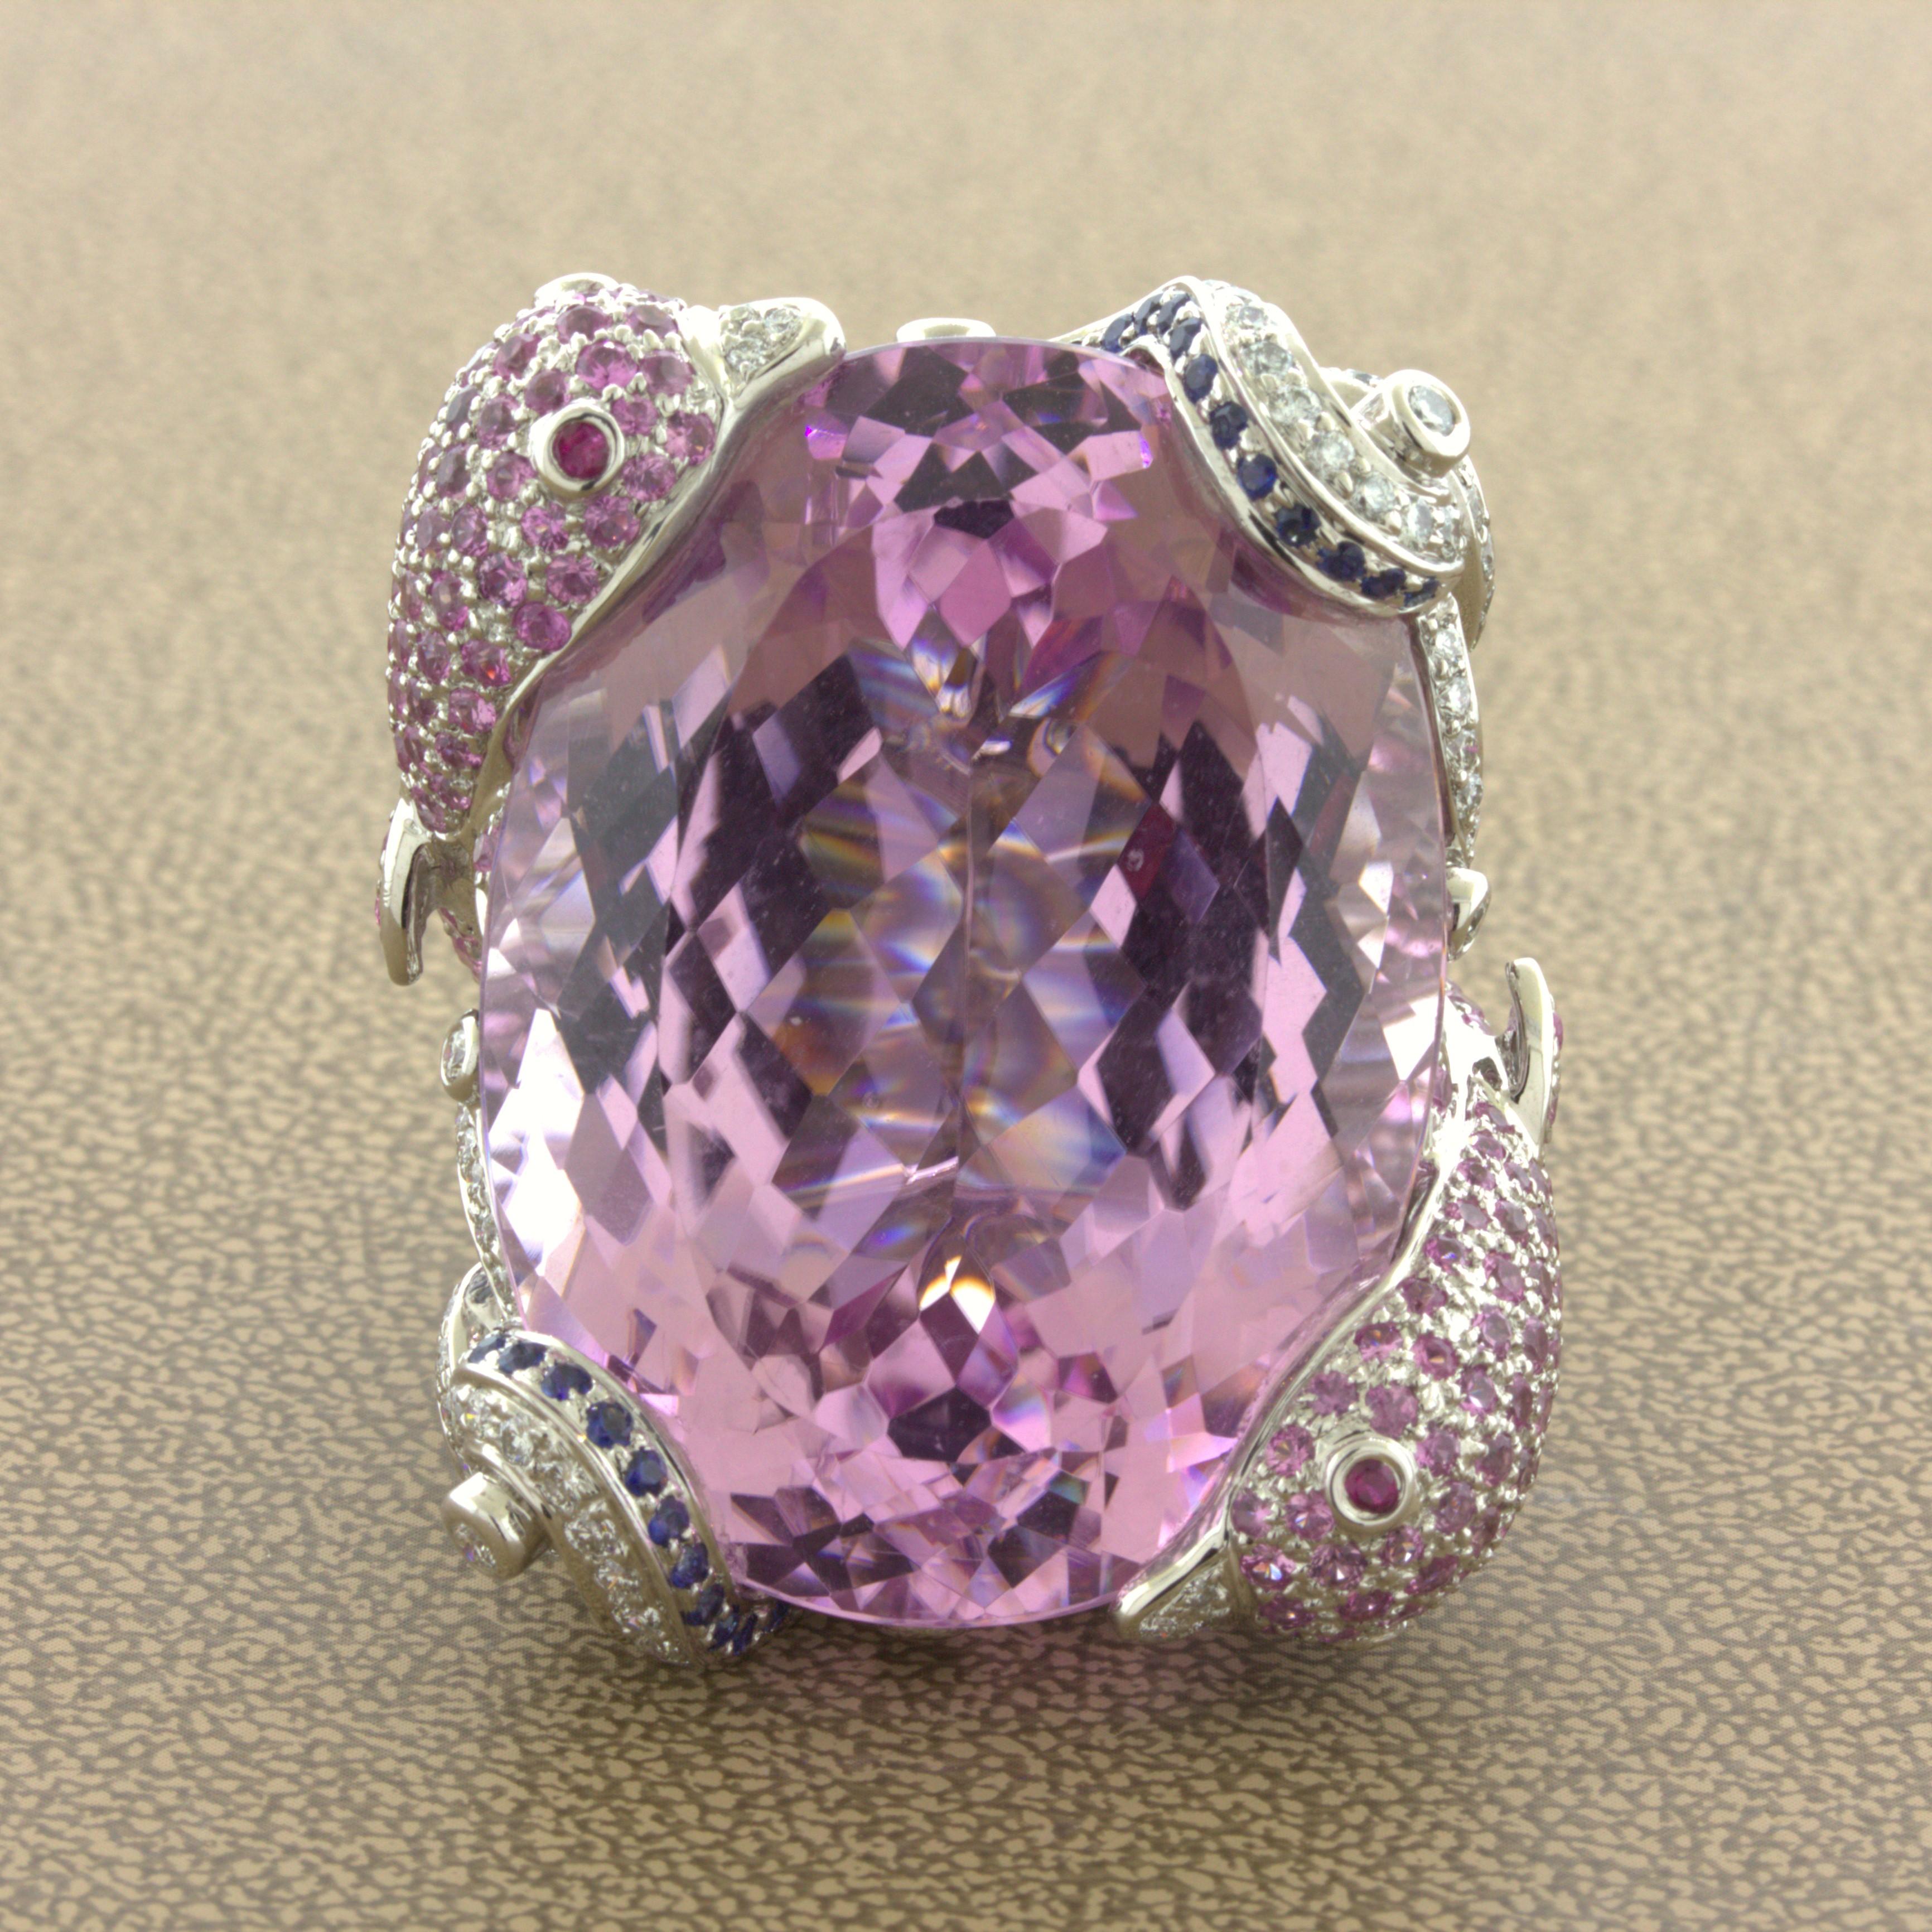 A super unique and out of this world cocktail ring! It features an amazing 1.07.08 carat bright barbie-pink kunzite surrounded by a detailed ocean and dolphin motif. There are two dolphins studded with 6.39 carats of round pink sapphires and ruby